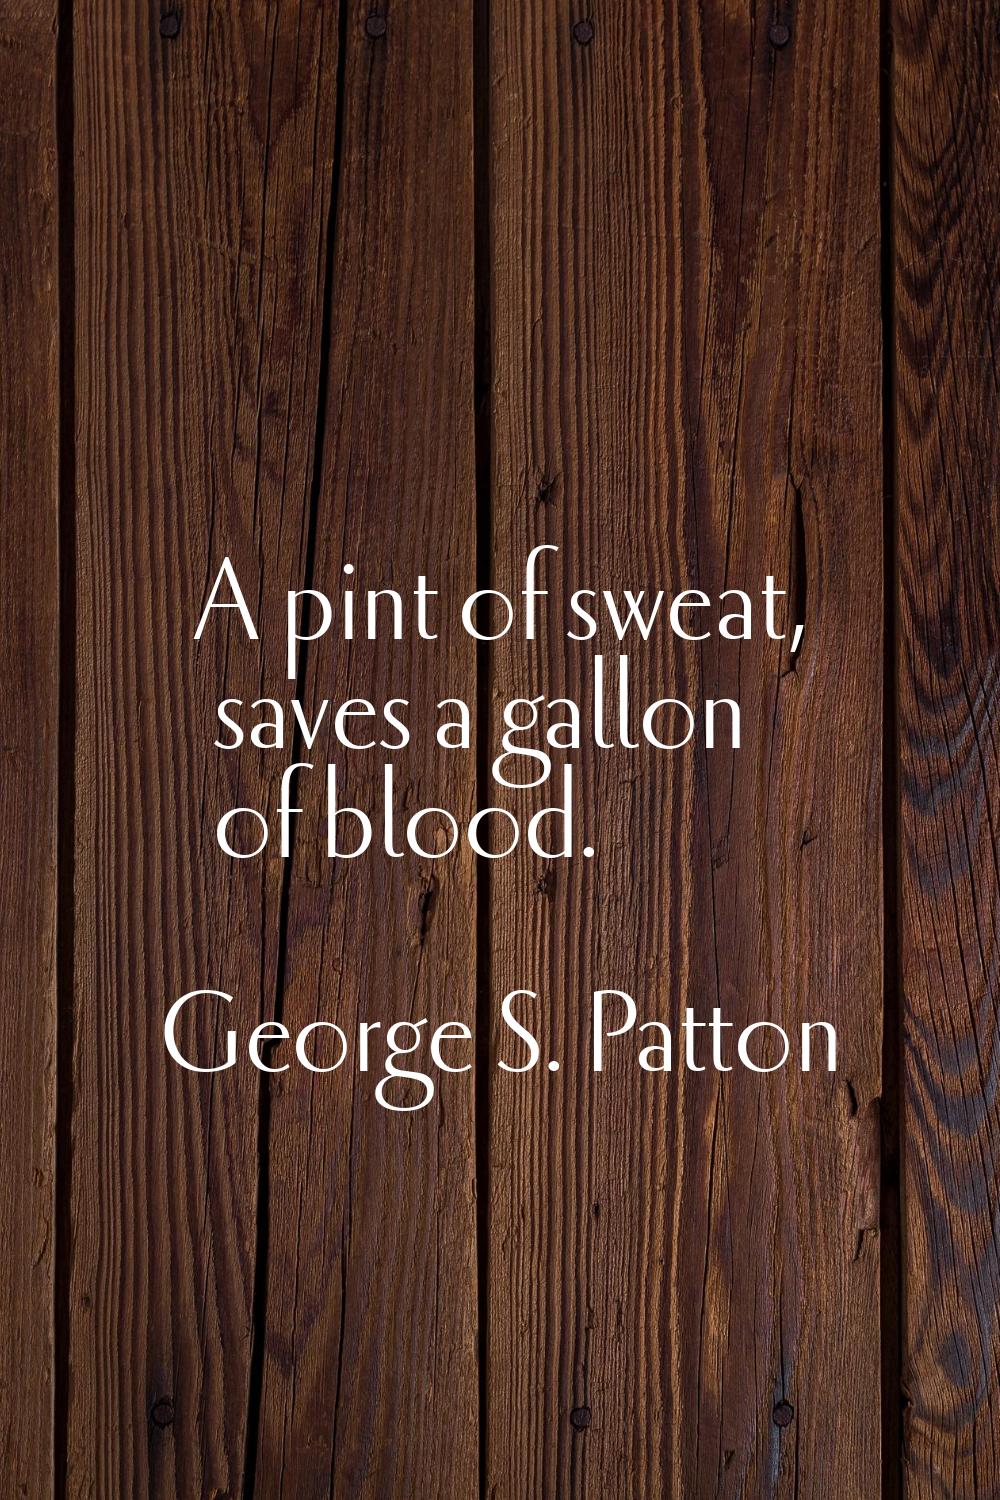 A pint of sweat, saves a gallon of blood.